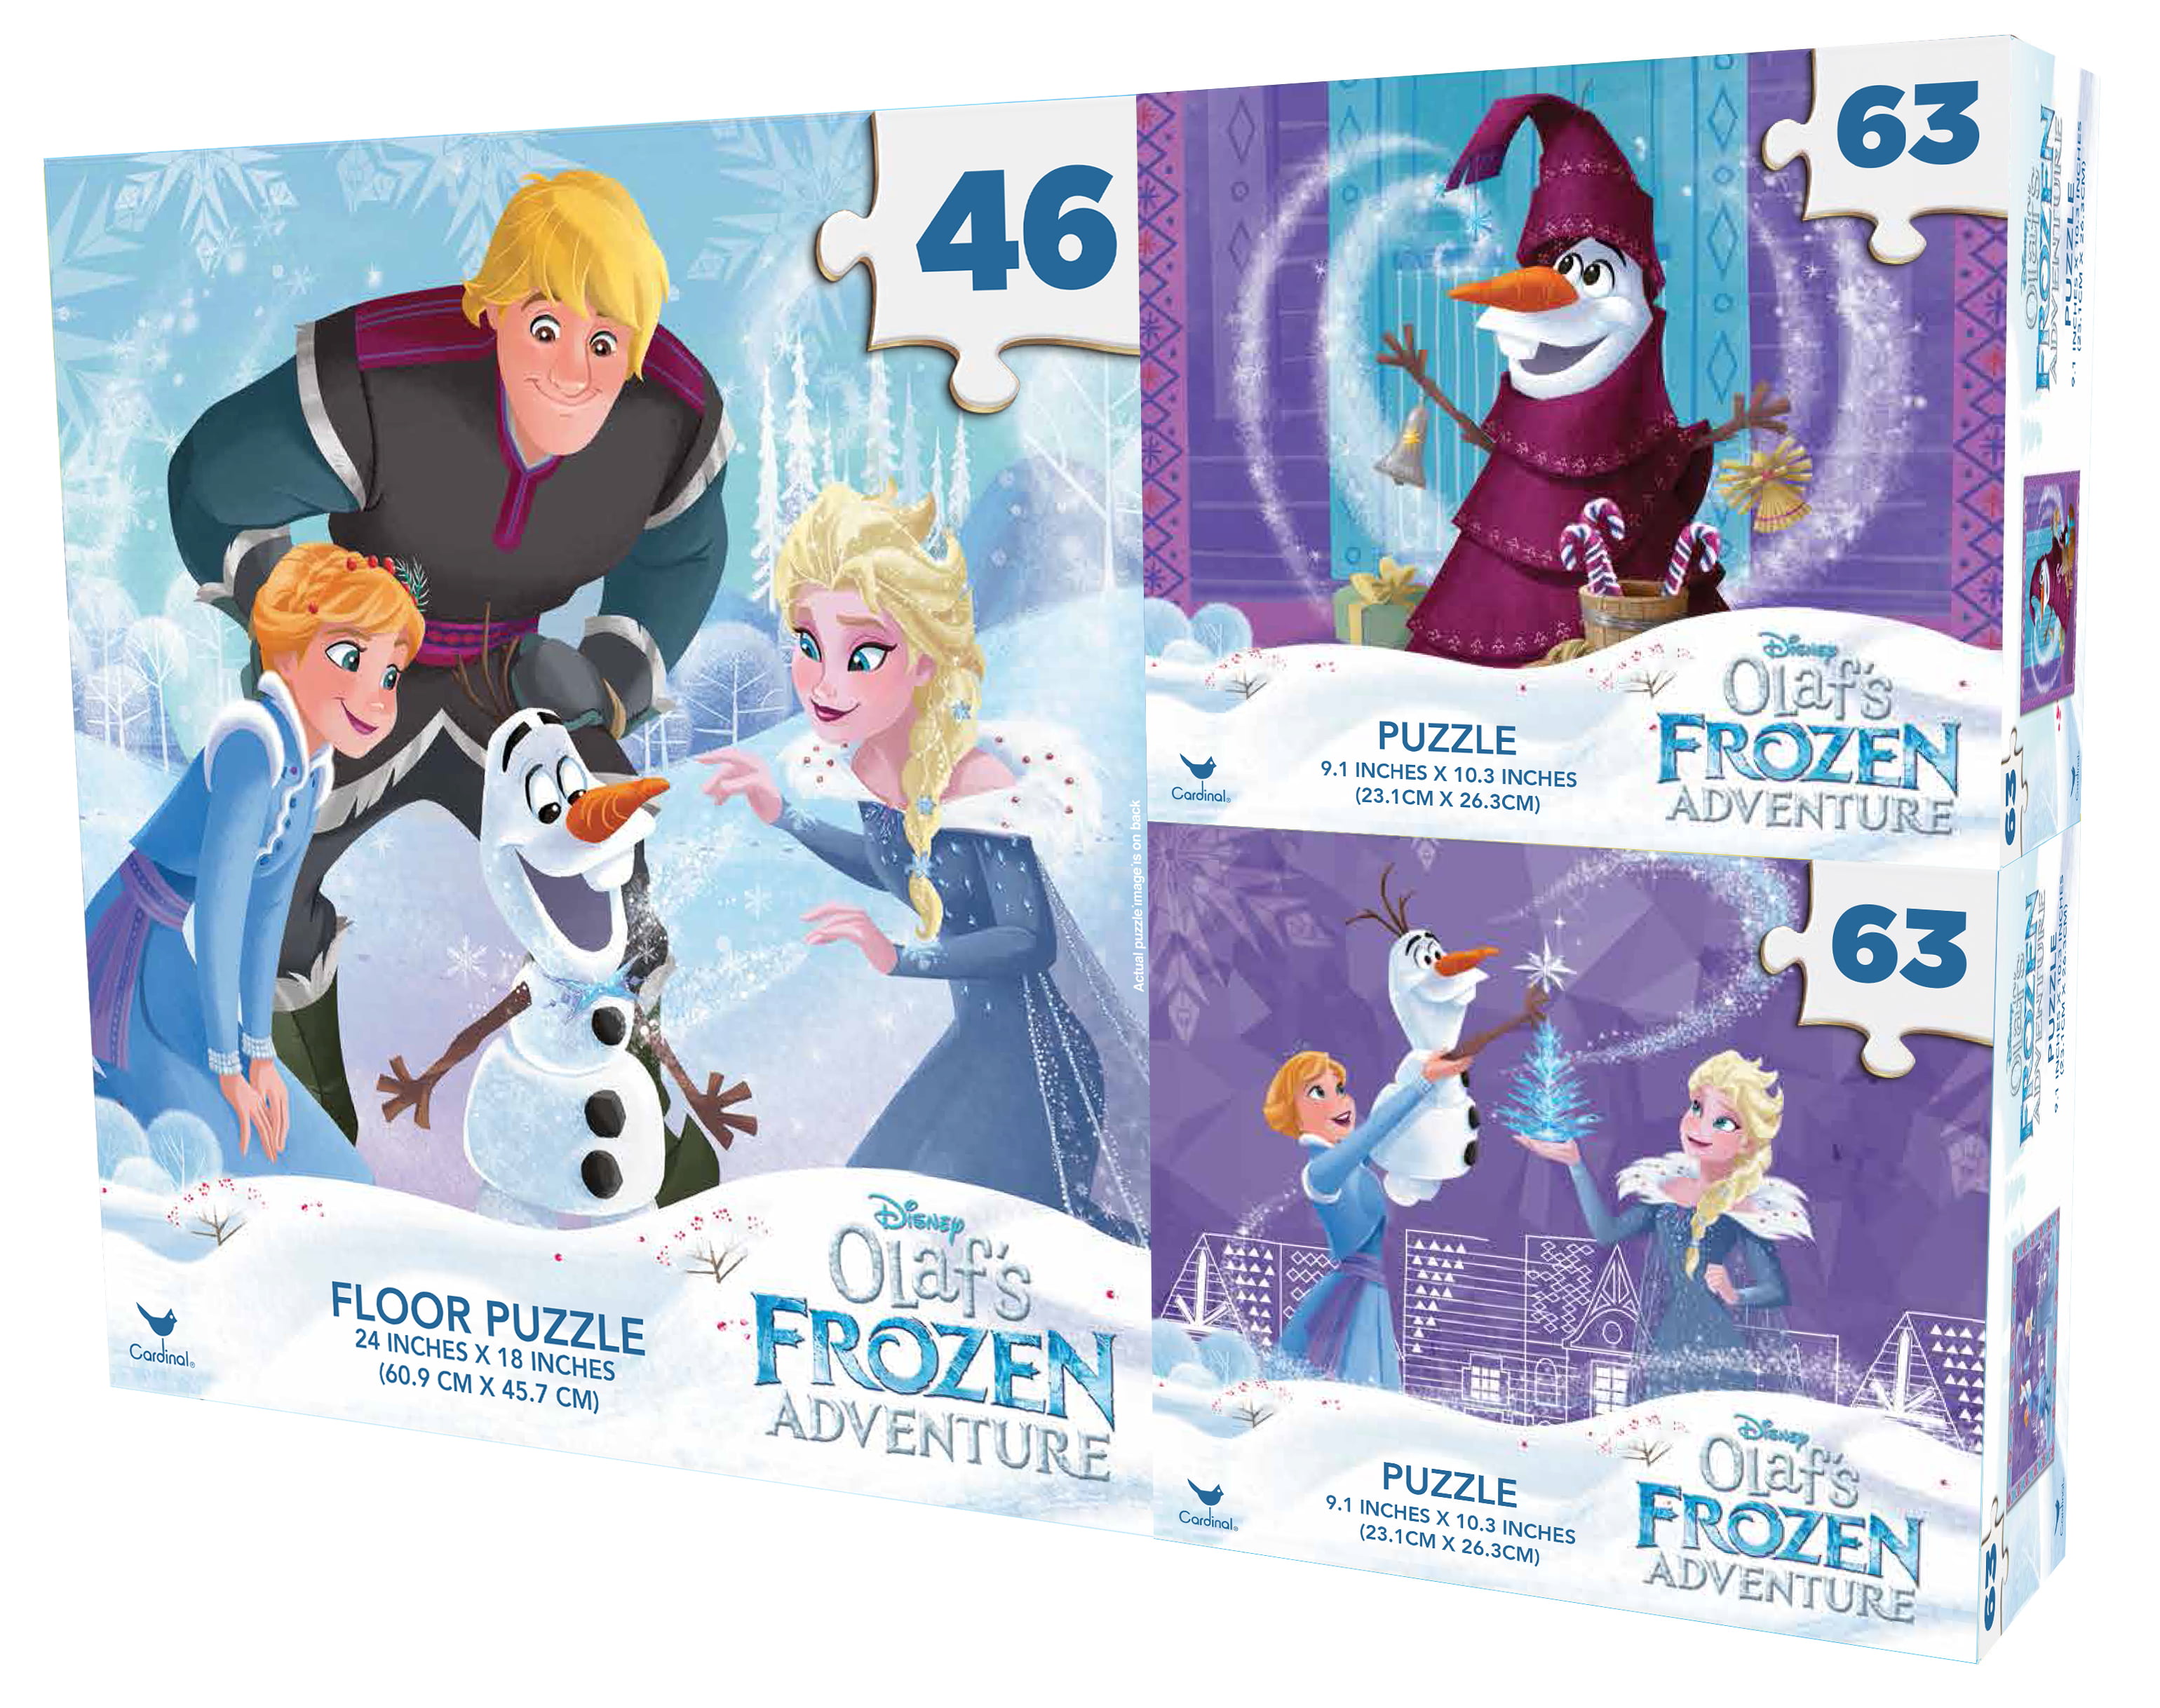 NEW OFFICIAL DISNEY FROZEN JIGSAW PUZZLE TRIO PUZZLE GAME 3 IN 1 FROZEN PUZZLES 